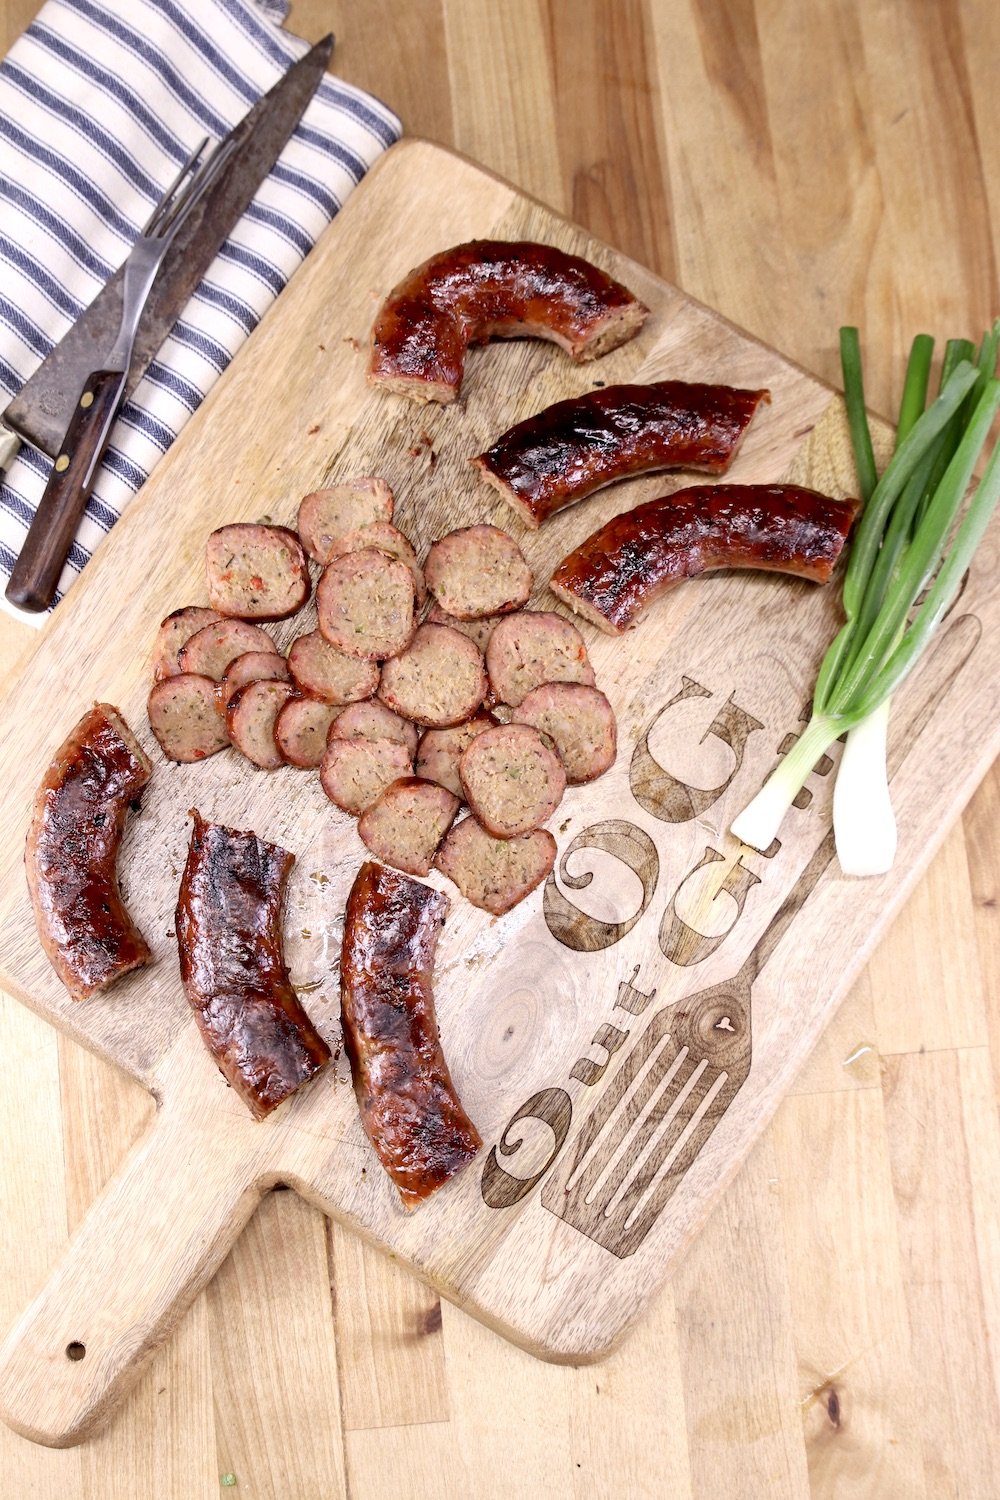 cutting board with smoked sausage links, slices and green onions